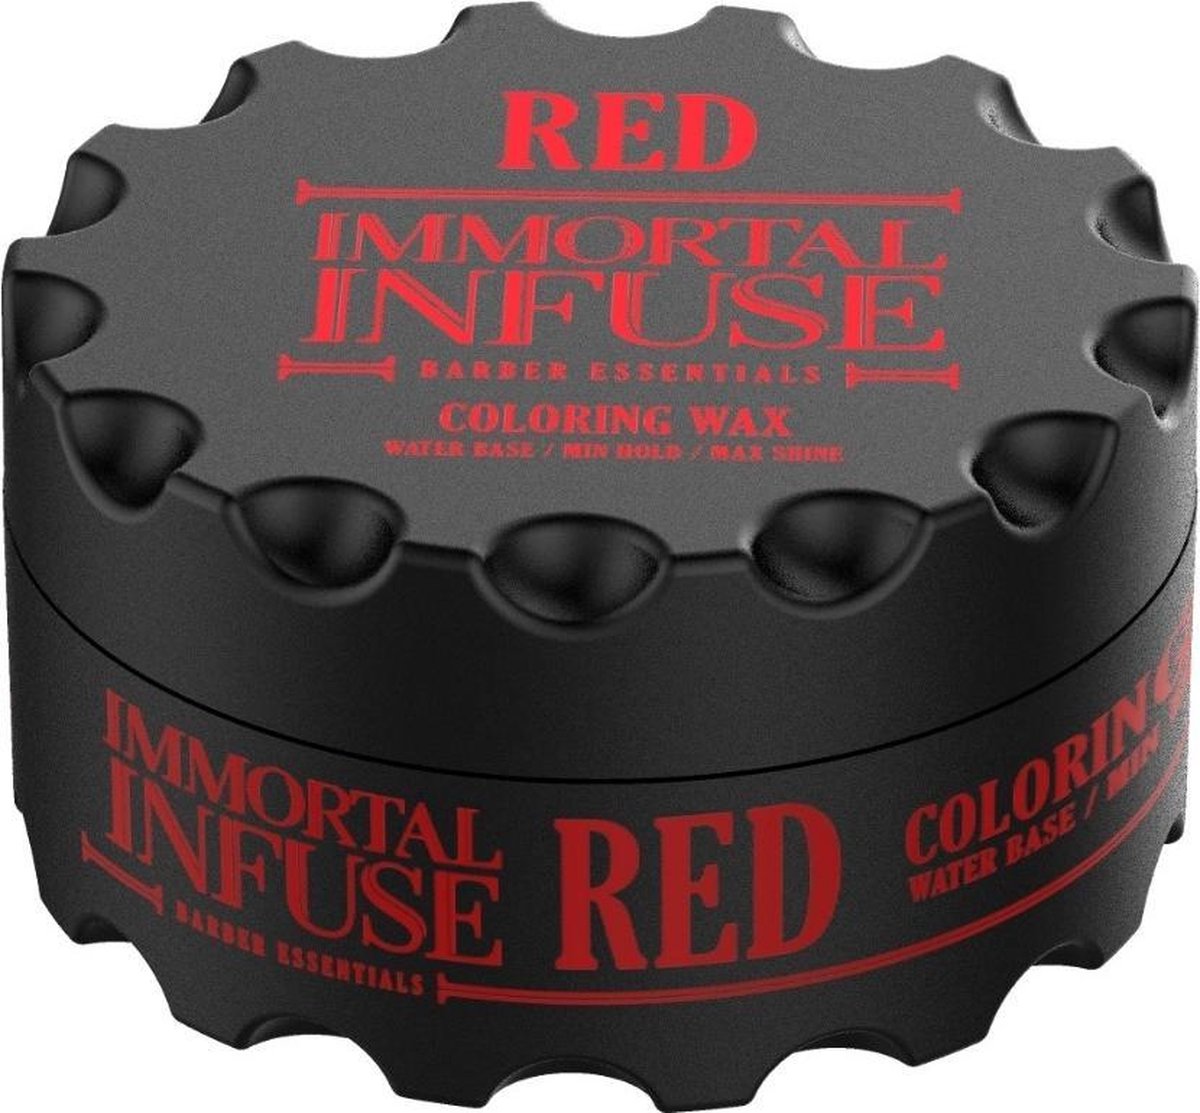 Immortal Infuse Coloring Wax Red 100ml